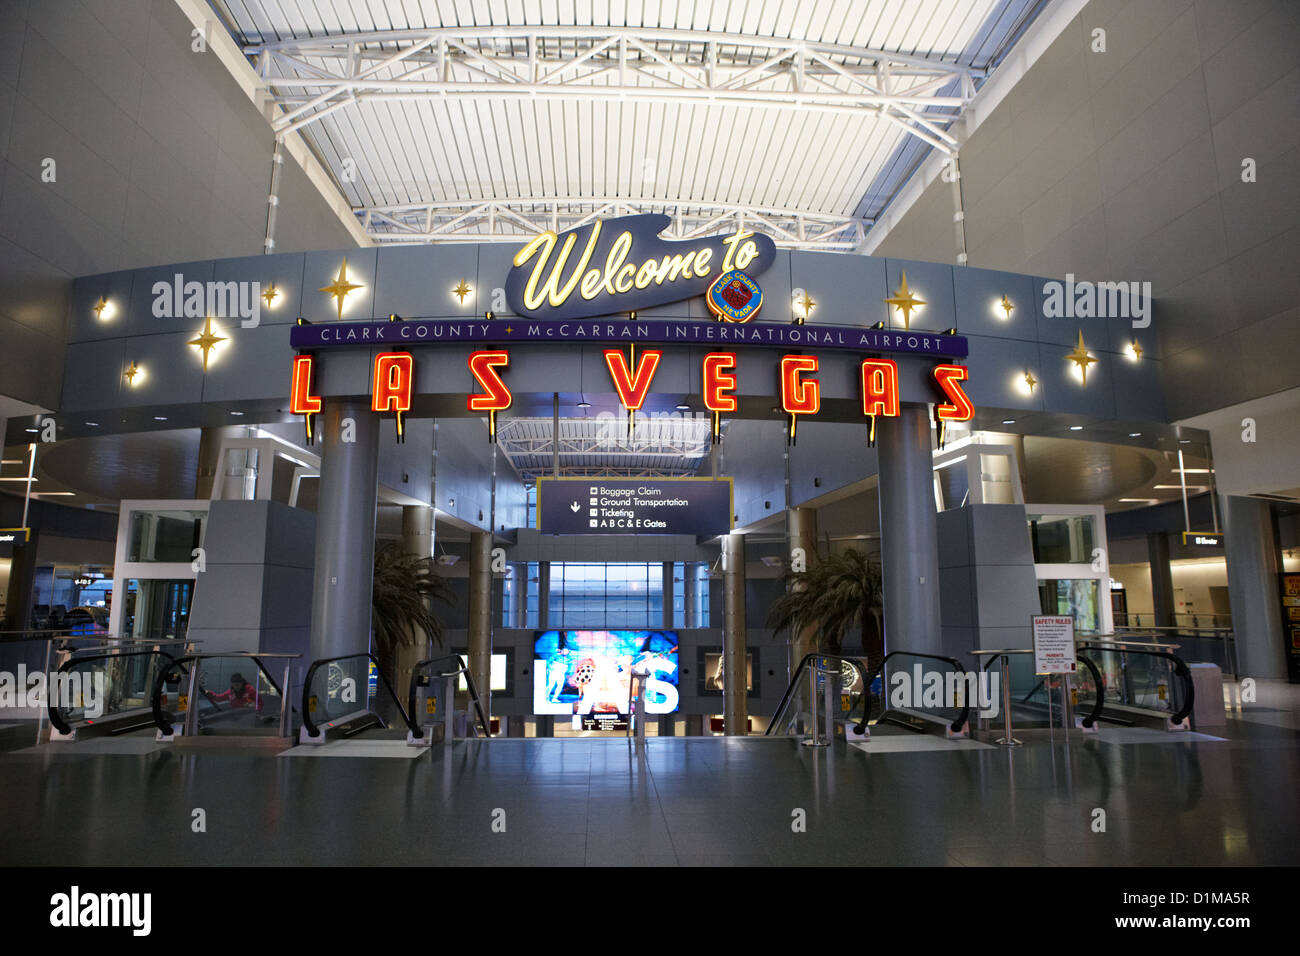 welcome to Las Vegas sign in mccarran international airport Nevada USA Stock Photo